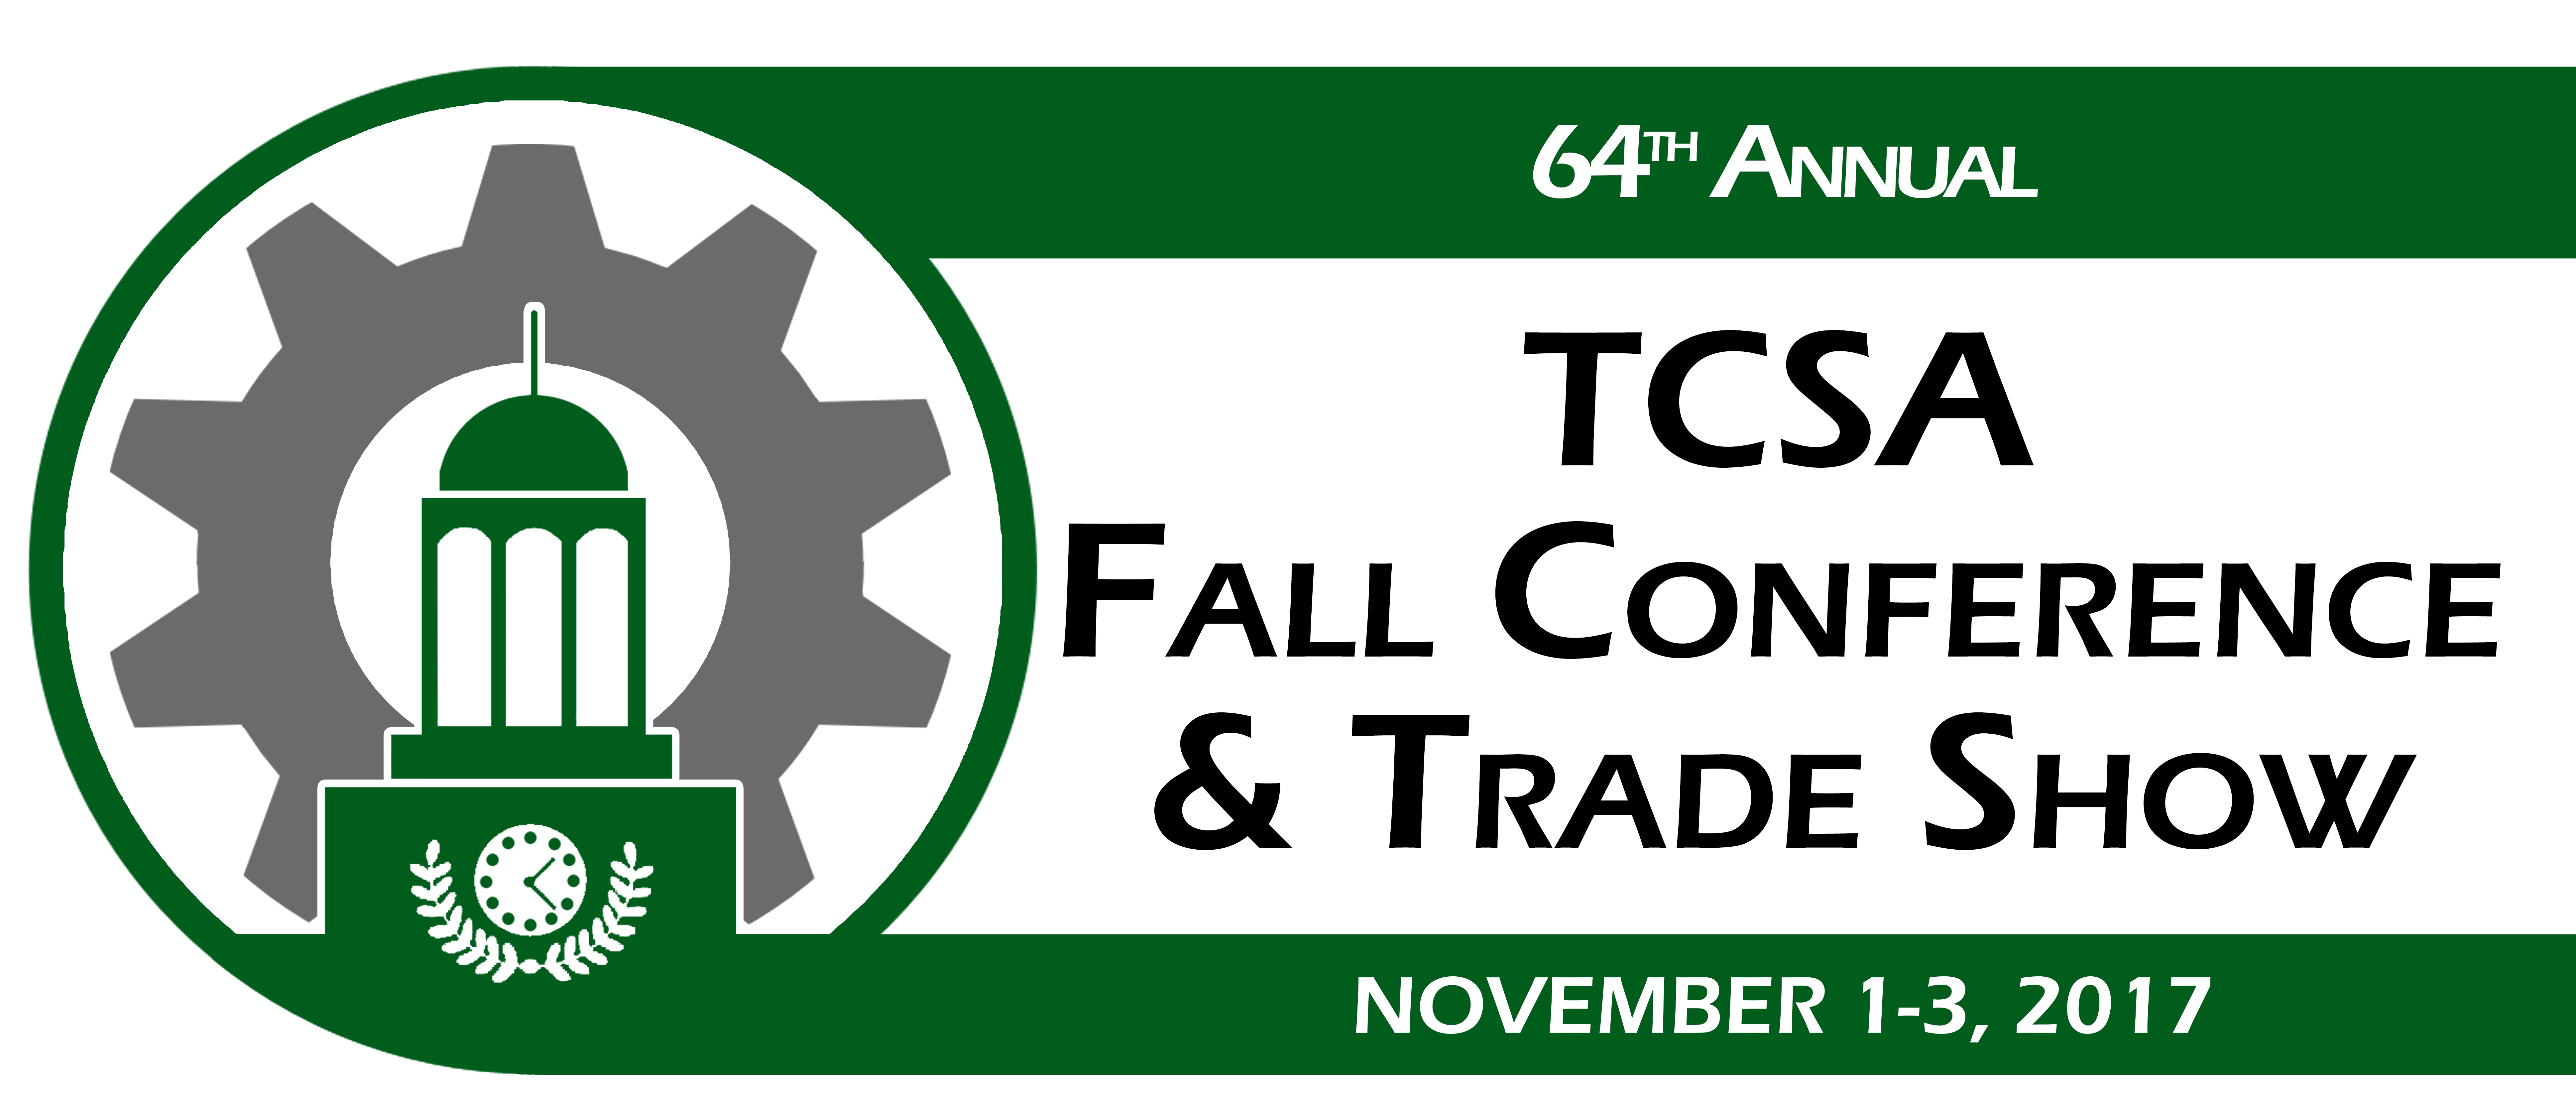 TCSA Fall Conference & Trade Show